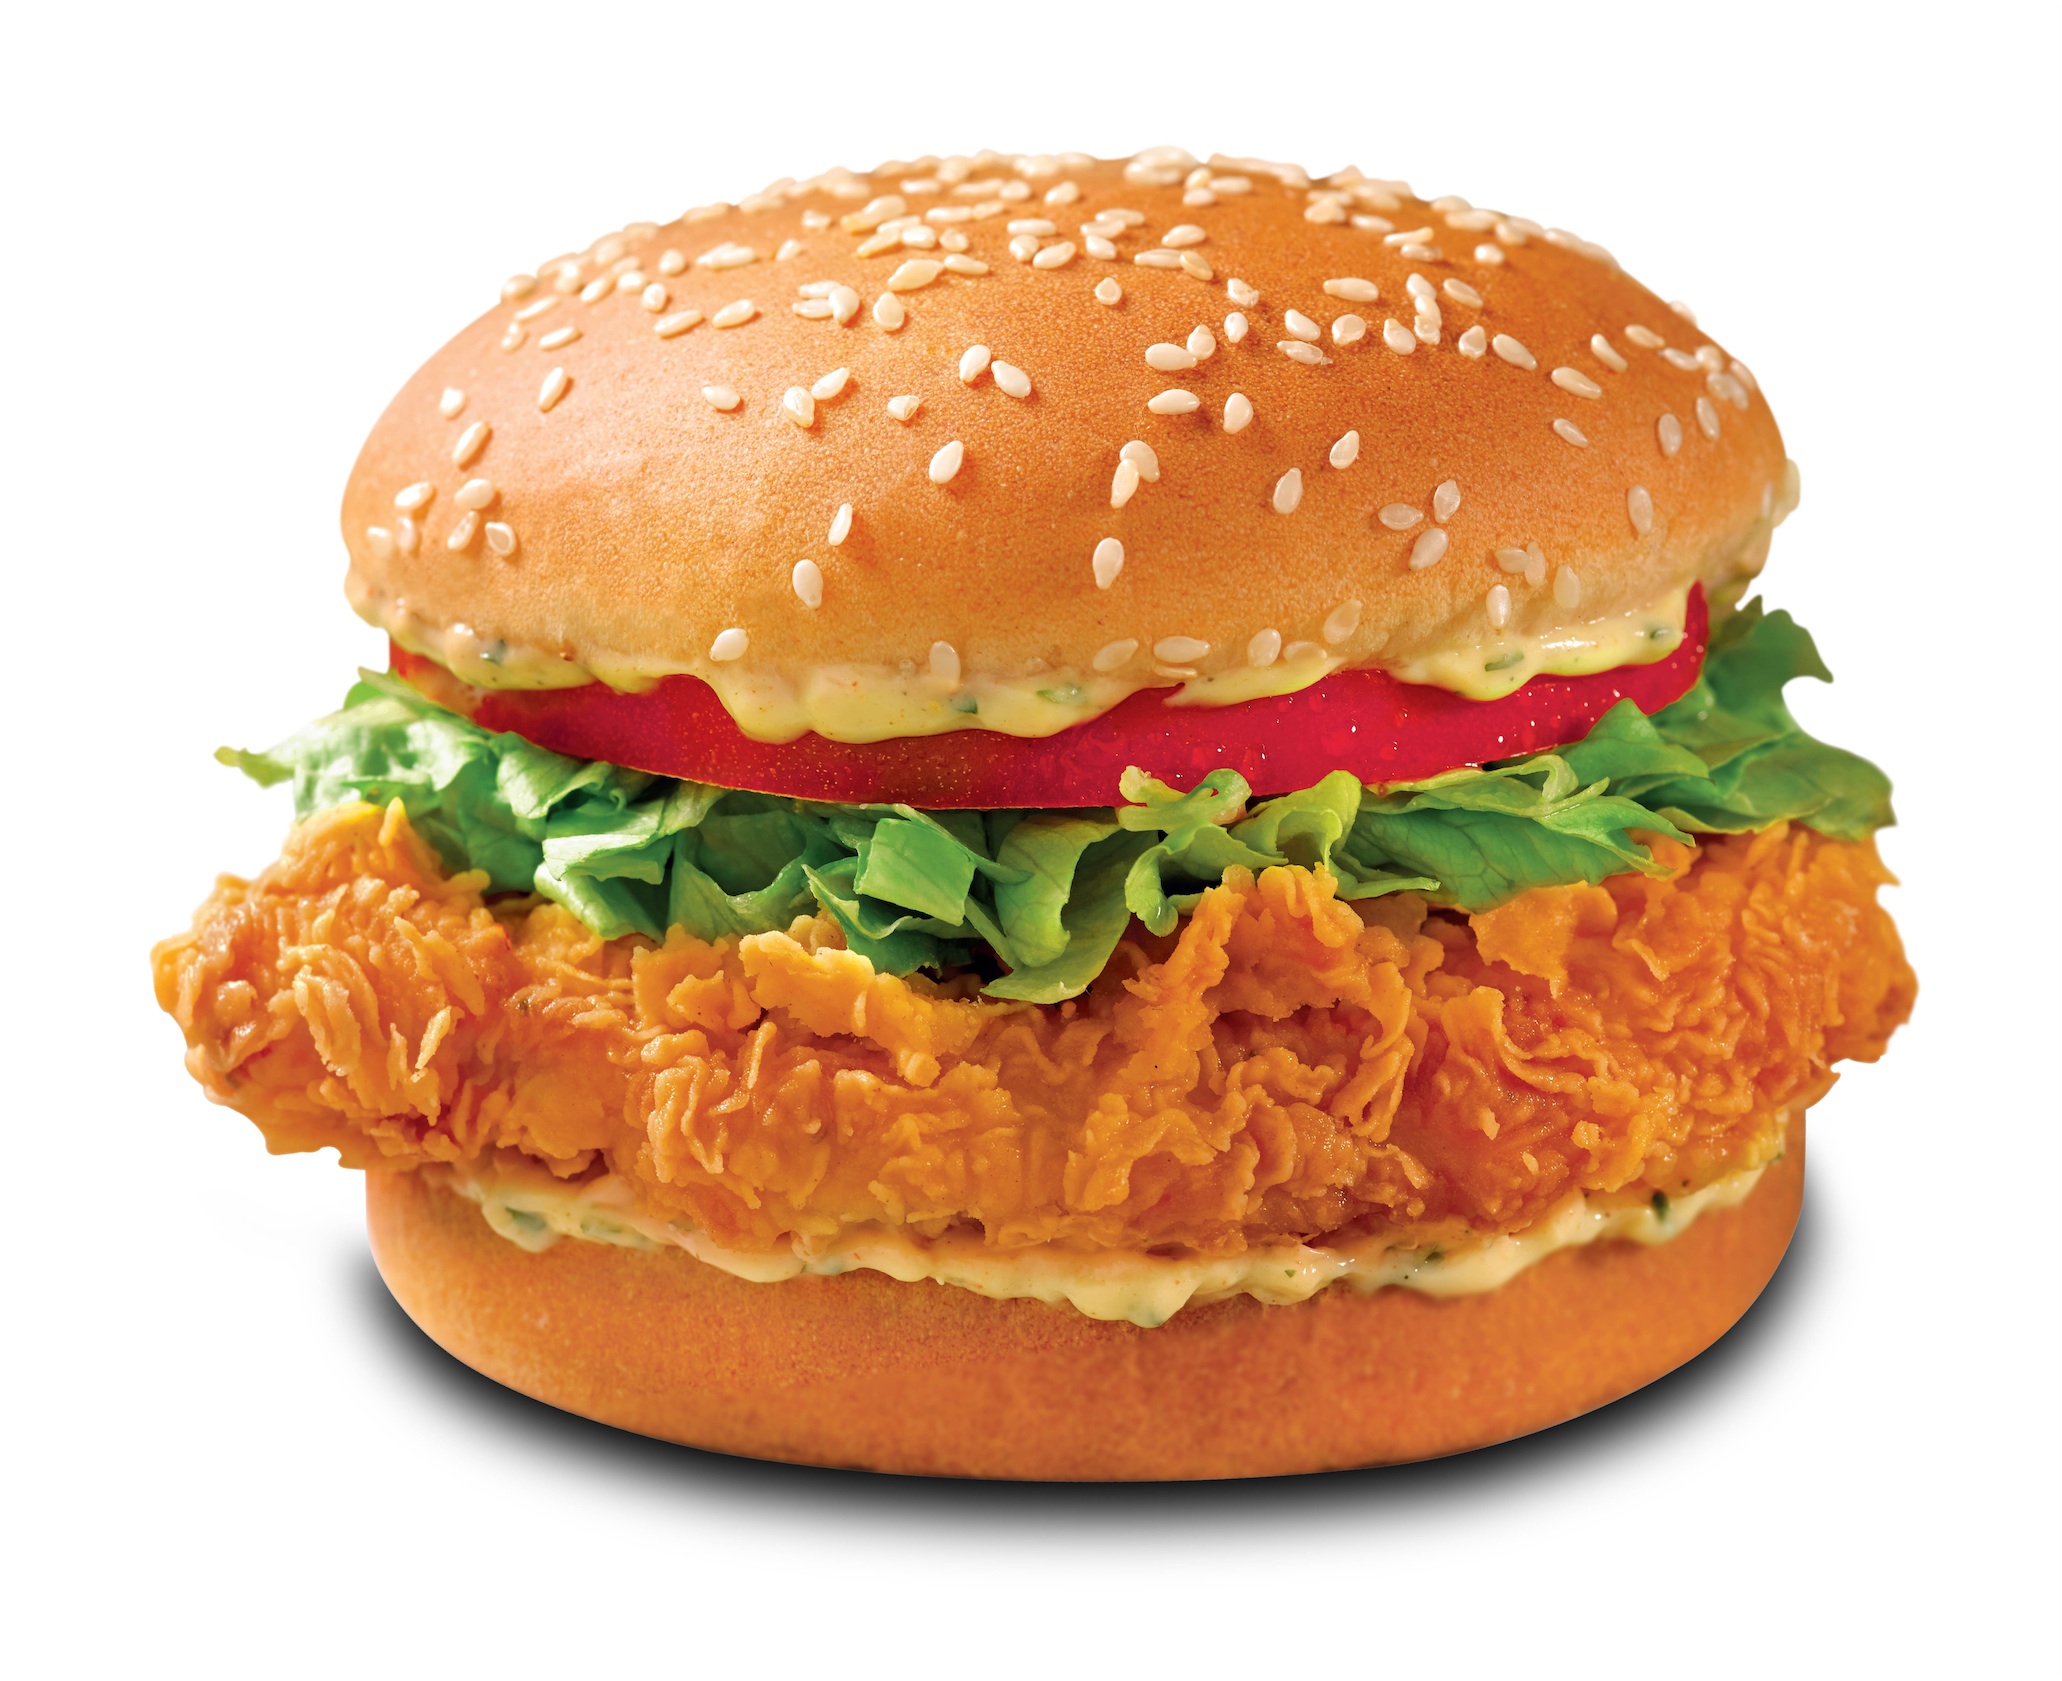 Popeyes Singapore Launches New Sandwiches! - Tried & Tasted!